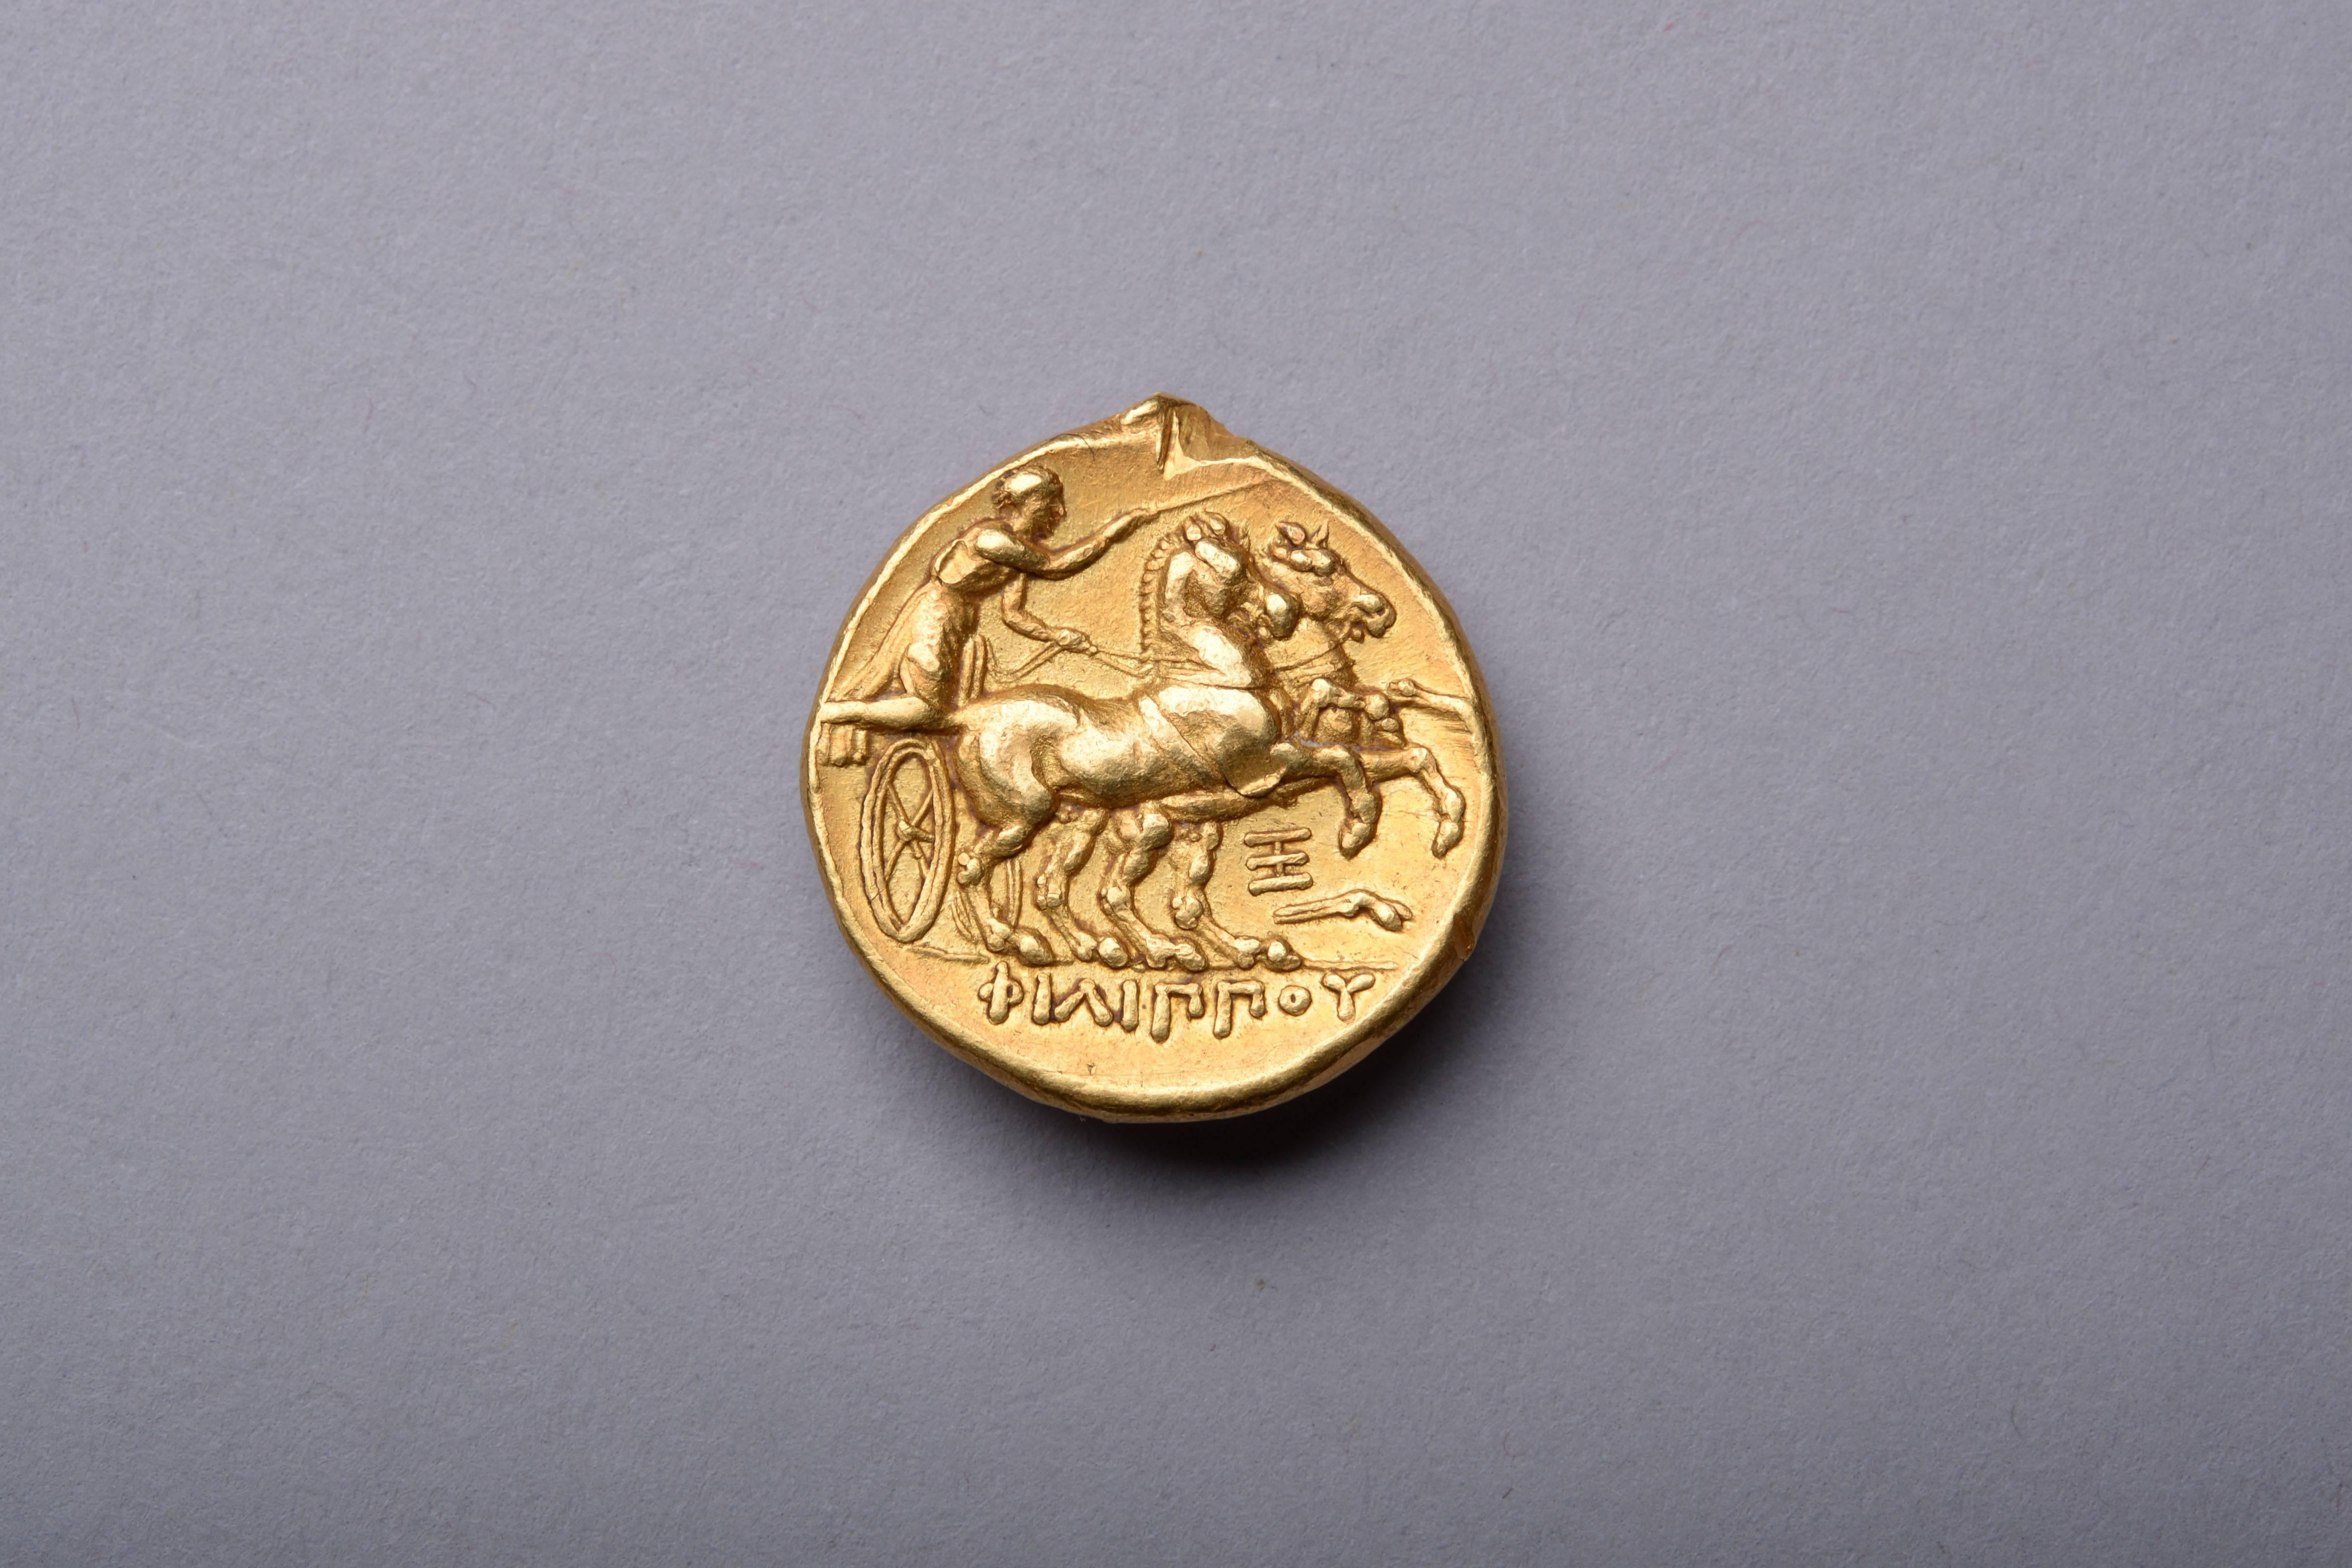 A beautifully toned ancient Greek gold stater, minted in the name of the brilliant King Philip II of Macedon. Issued, circa 323-316 BC, at the Abydos mint.

The obverse with a youthful portrait of the god Apollo, shown with unruly hair, slightly